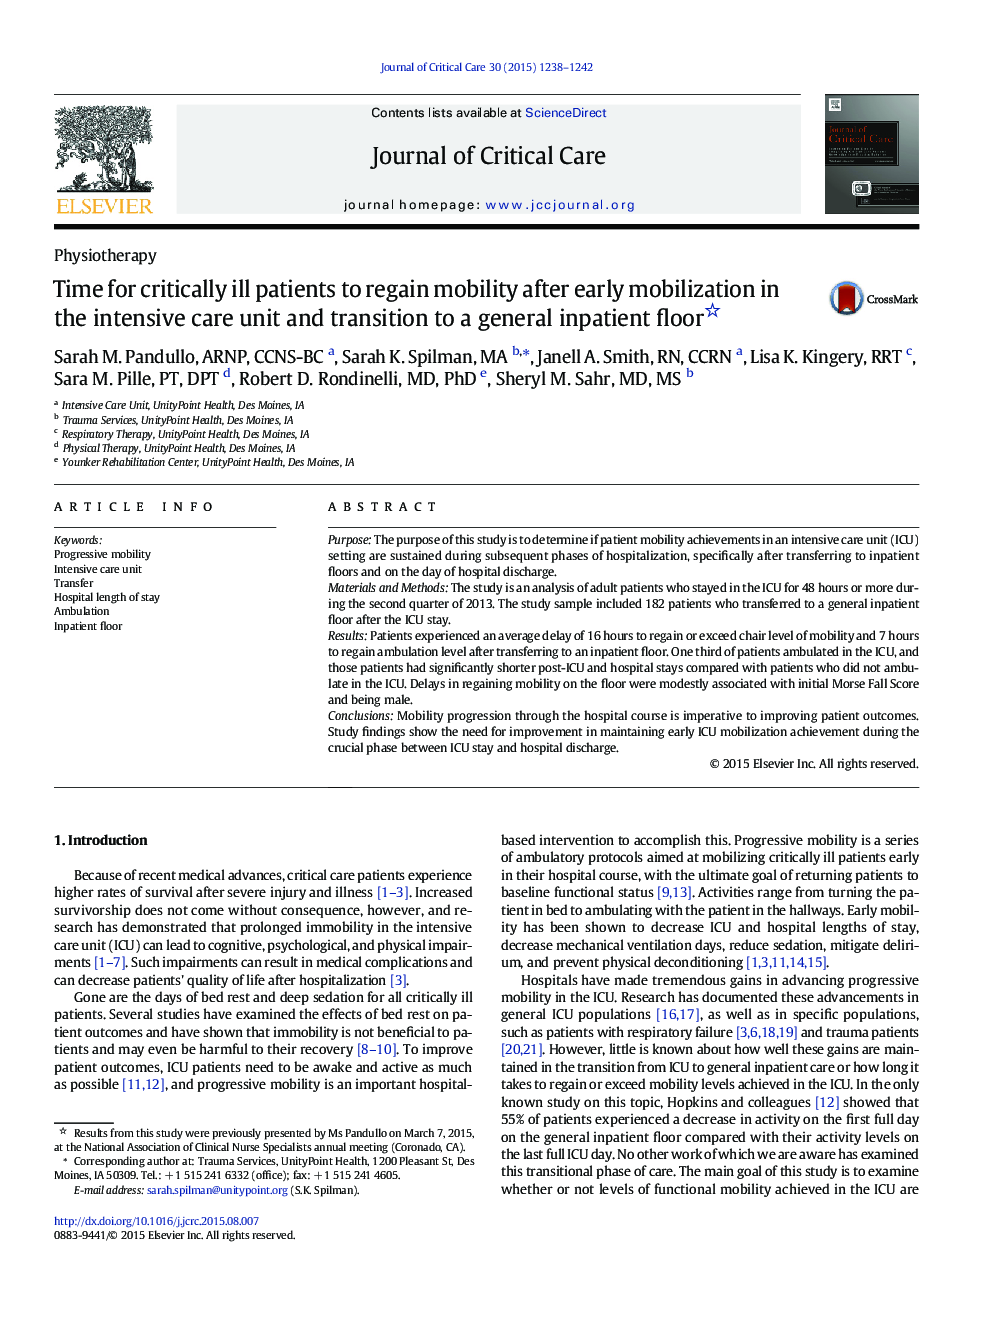 PhysiotherapyTime for critically ill patients to regain mobility after early mobilization in the intensive care unit and transition to a general inpatient floor